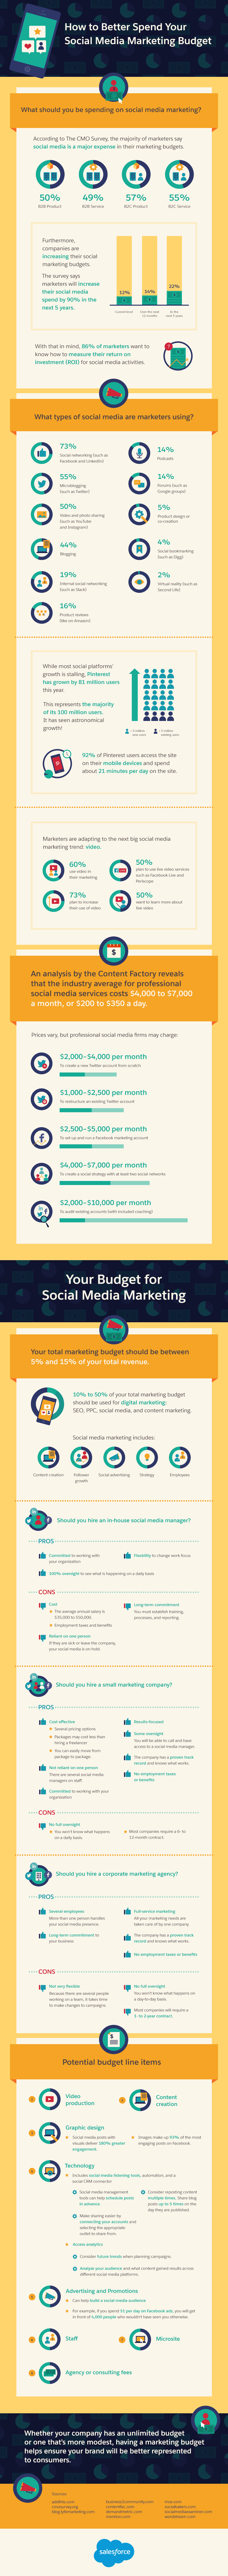 How to Better Spend Your Social Media Marketing Budget [Infographic] | Social Media Today